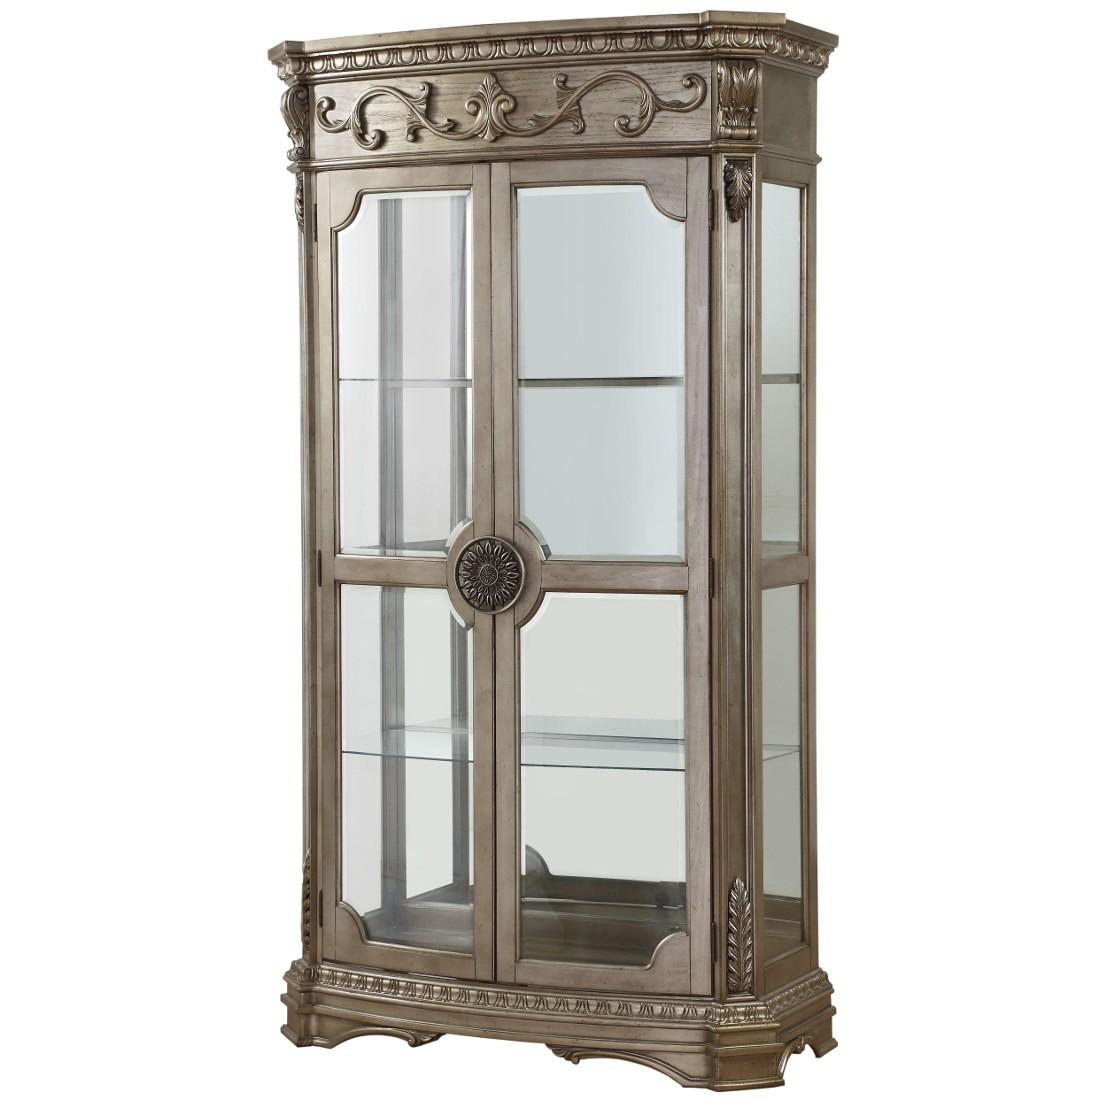 Traditional,  Vintage Curio Northville-66924 Northville-66924 in Antique, Silver, Champagne 